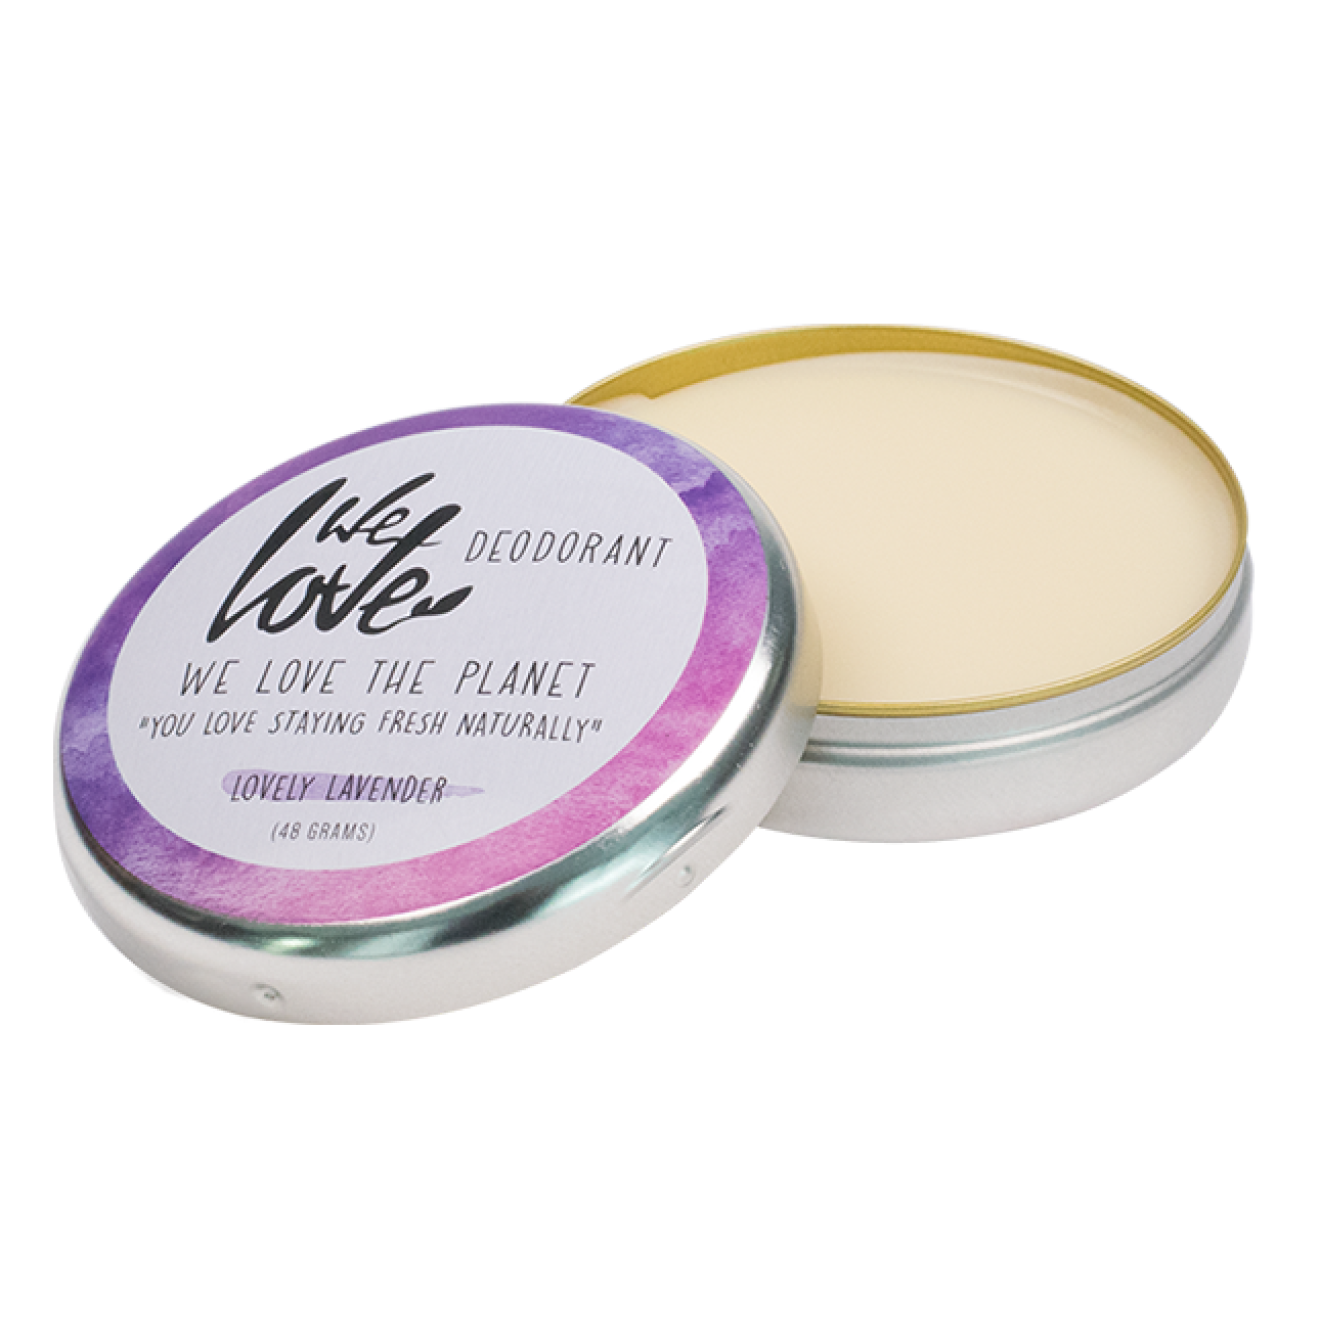 We love the Planet Deocreme Lovely Lavender 48 g